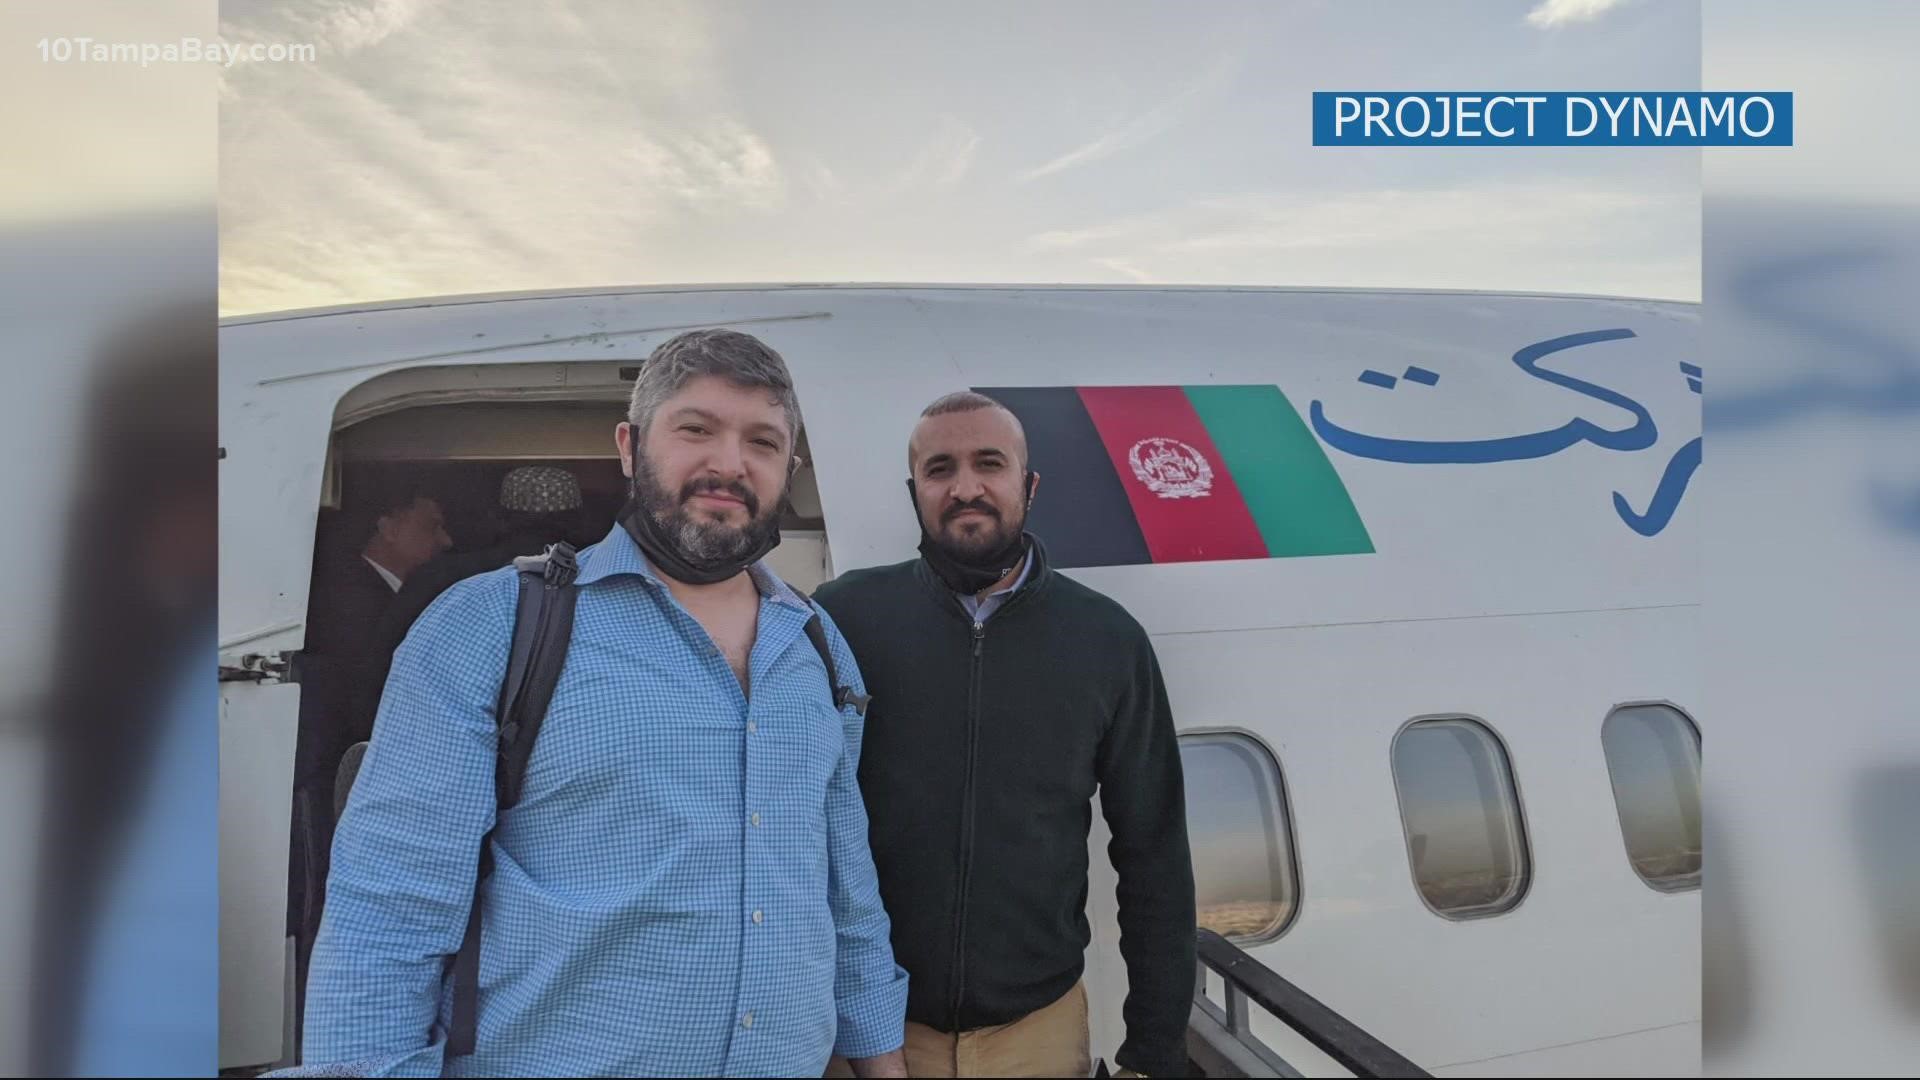 Project Dynamo, which is solely donation-based, has already helped evacuate thousands of Americans in Afghanistan.